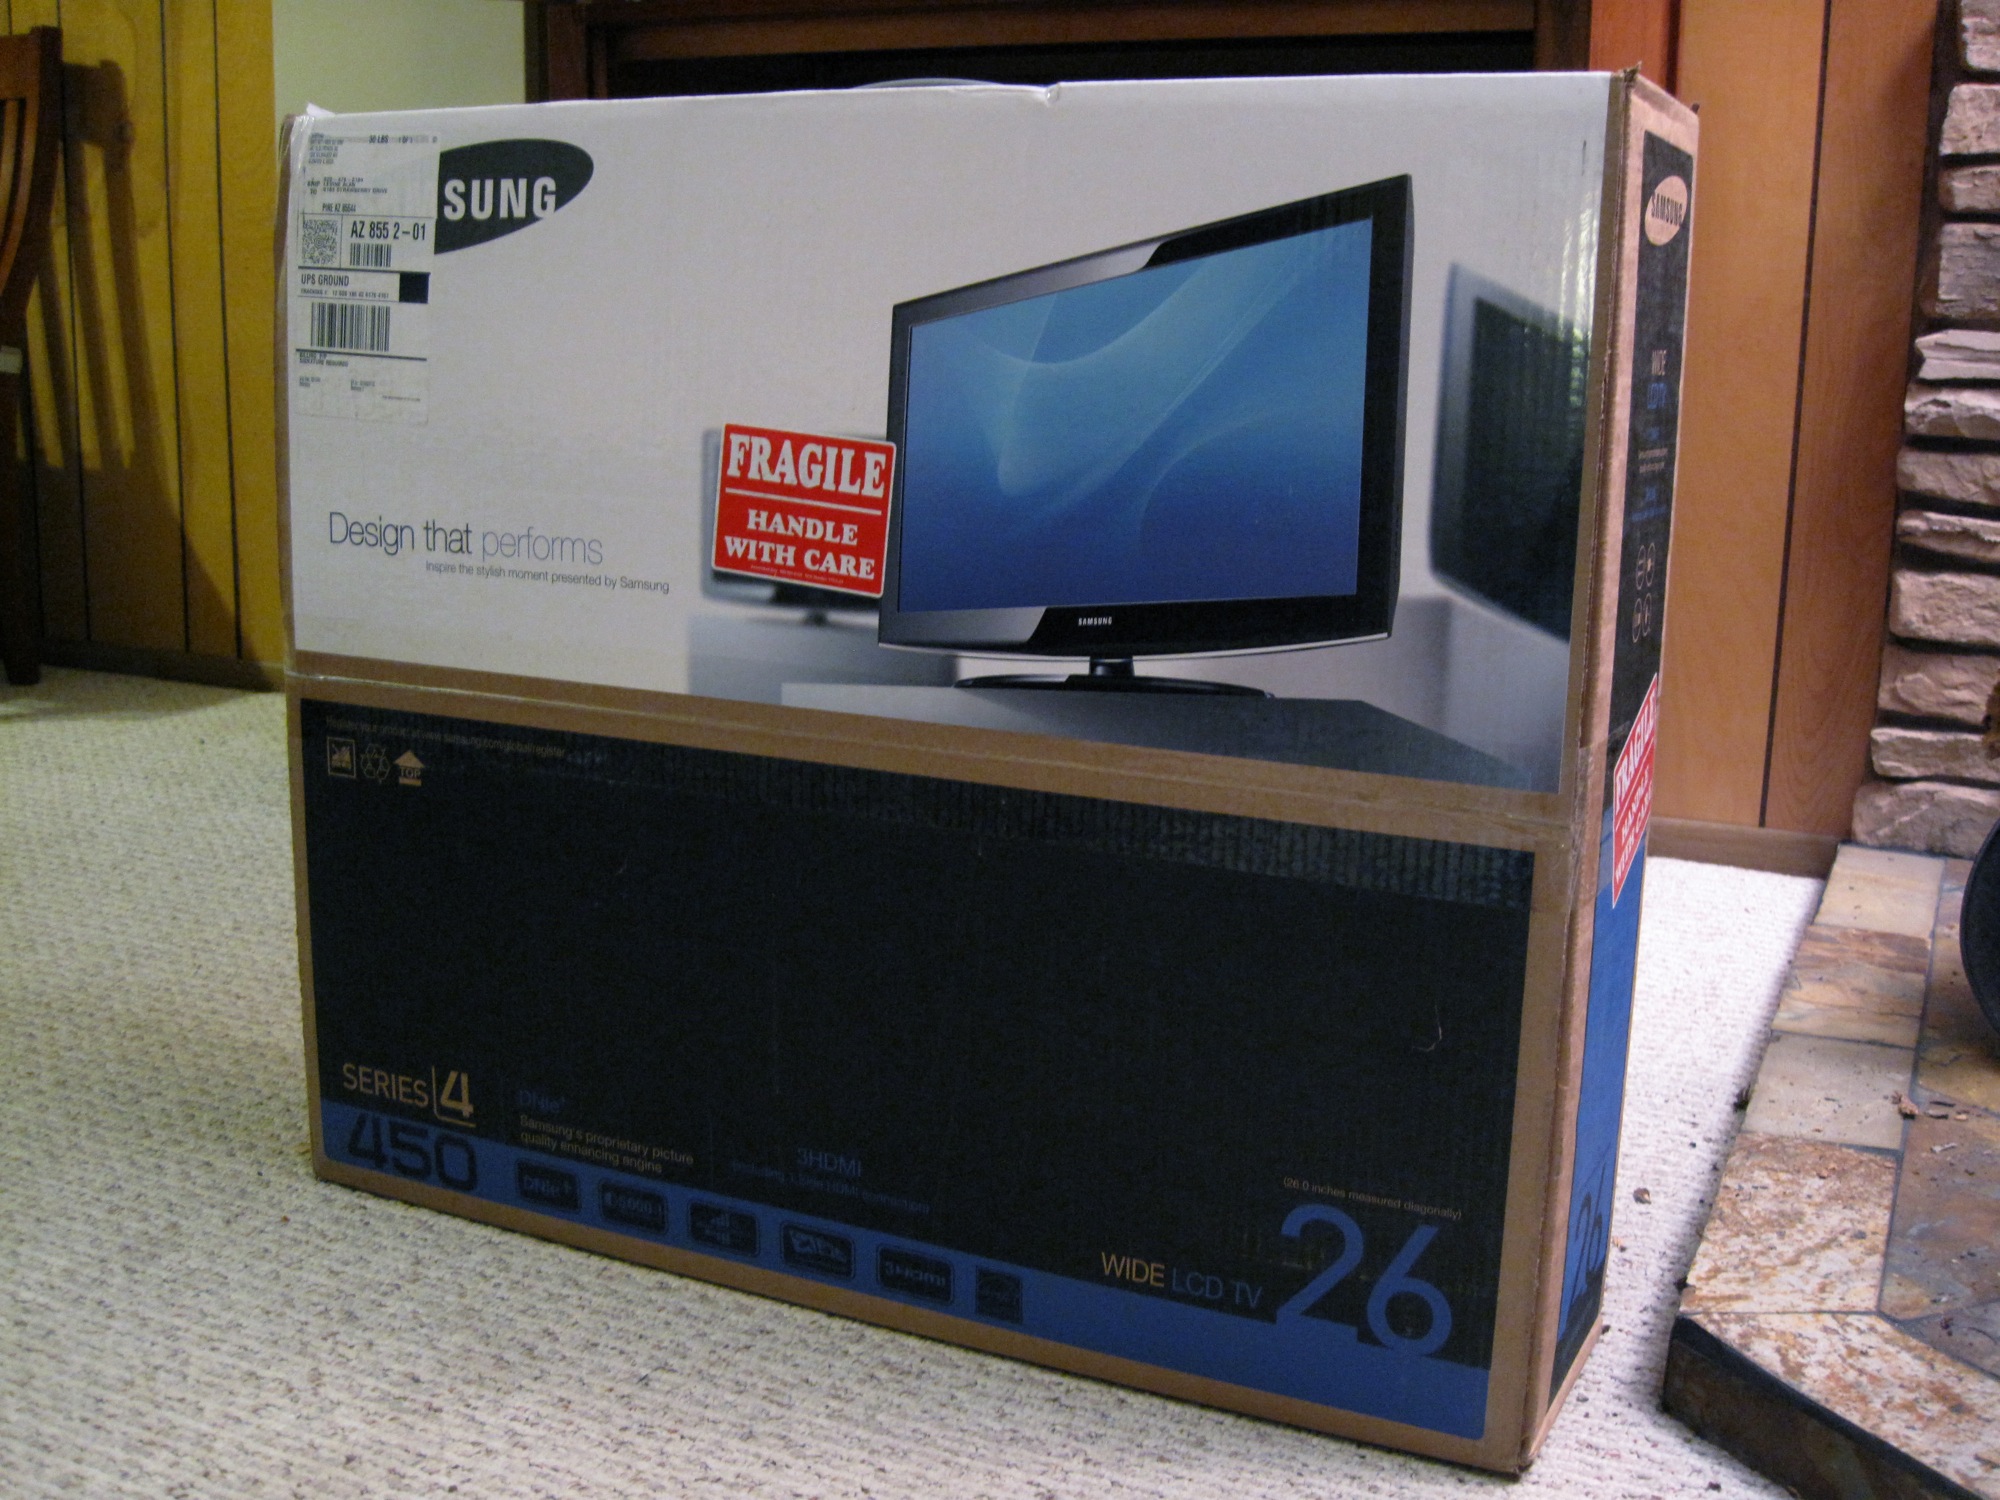 a boxed television set with a price tag